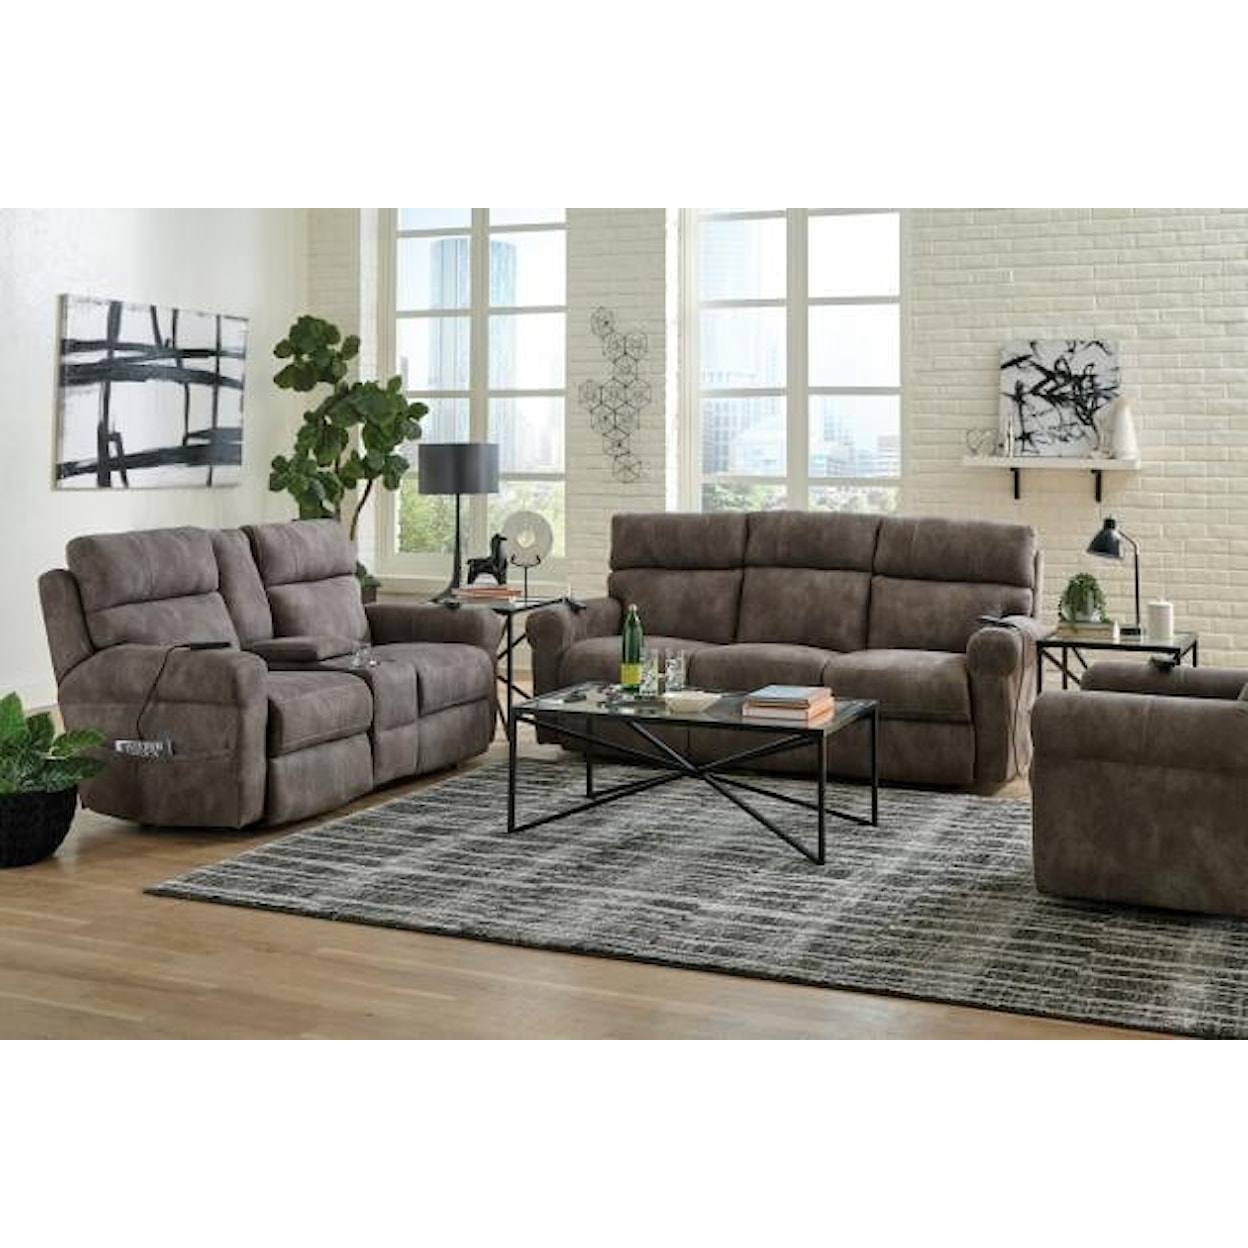 Catnapper 6301 Tranquility 63019 TRIPLE Power Console Loveseat